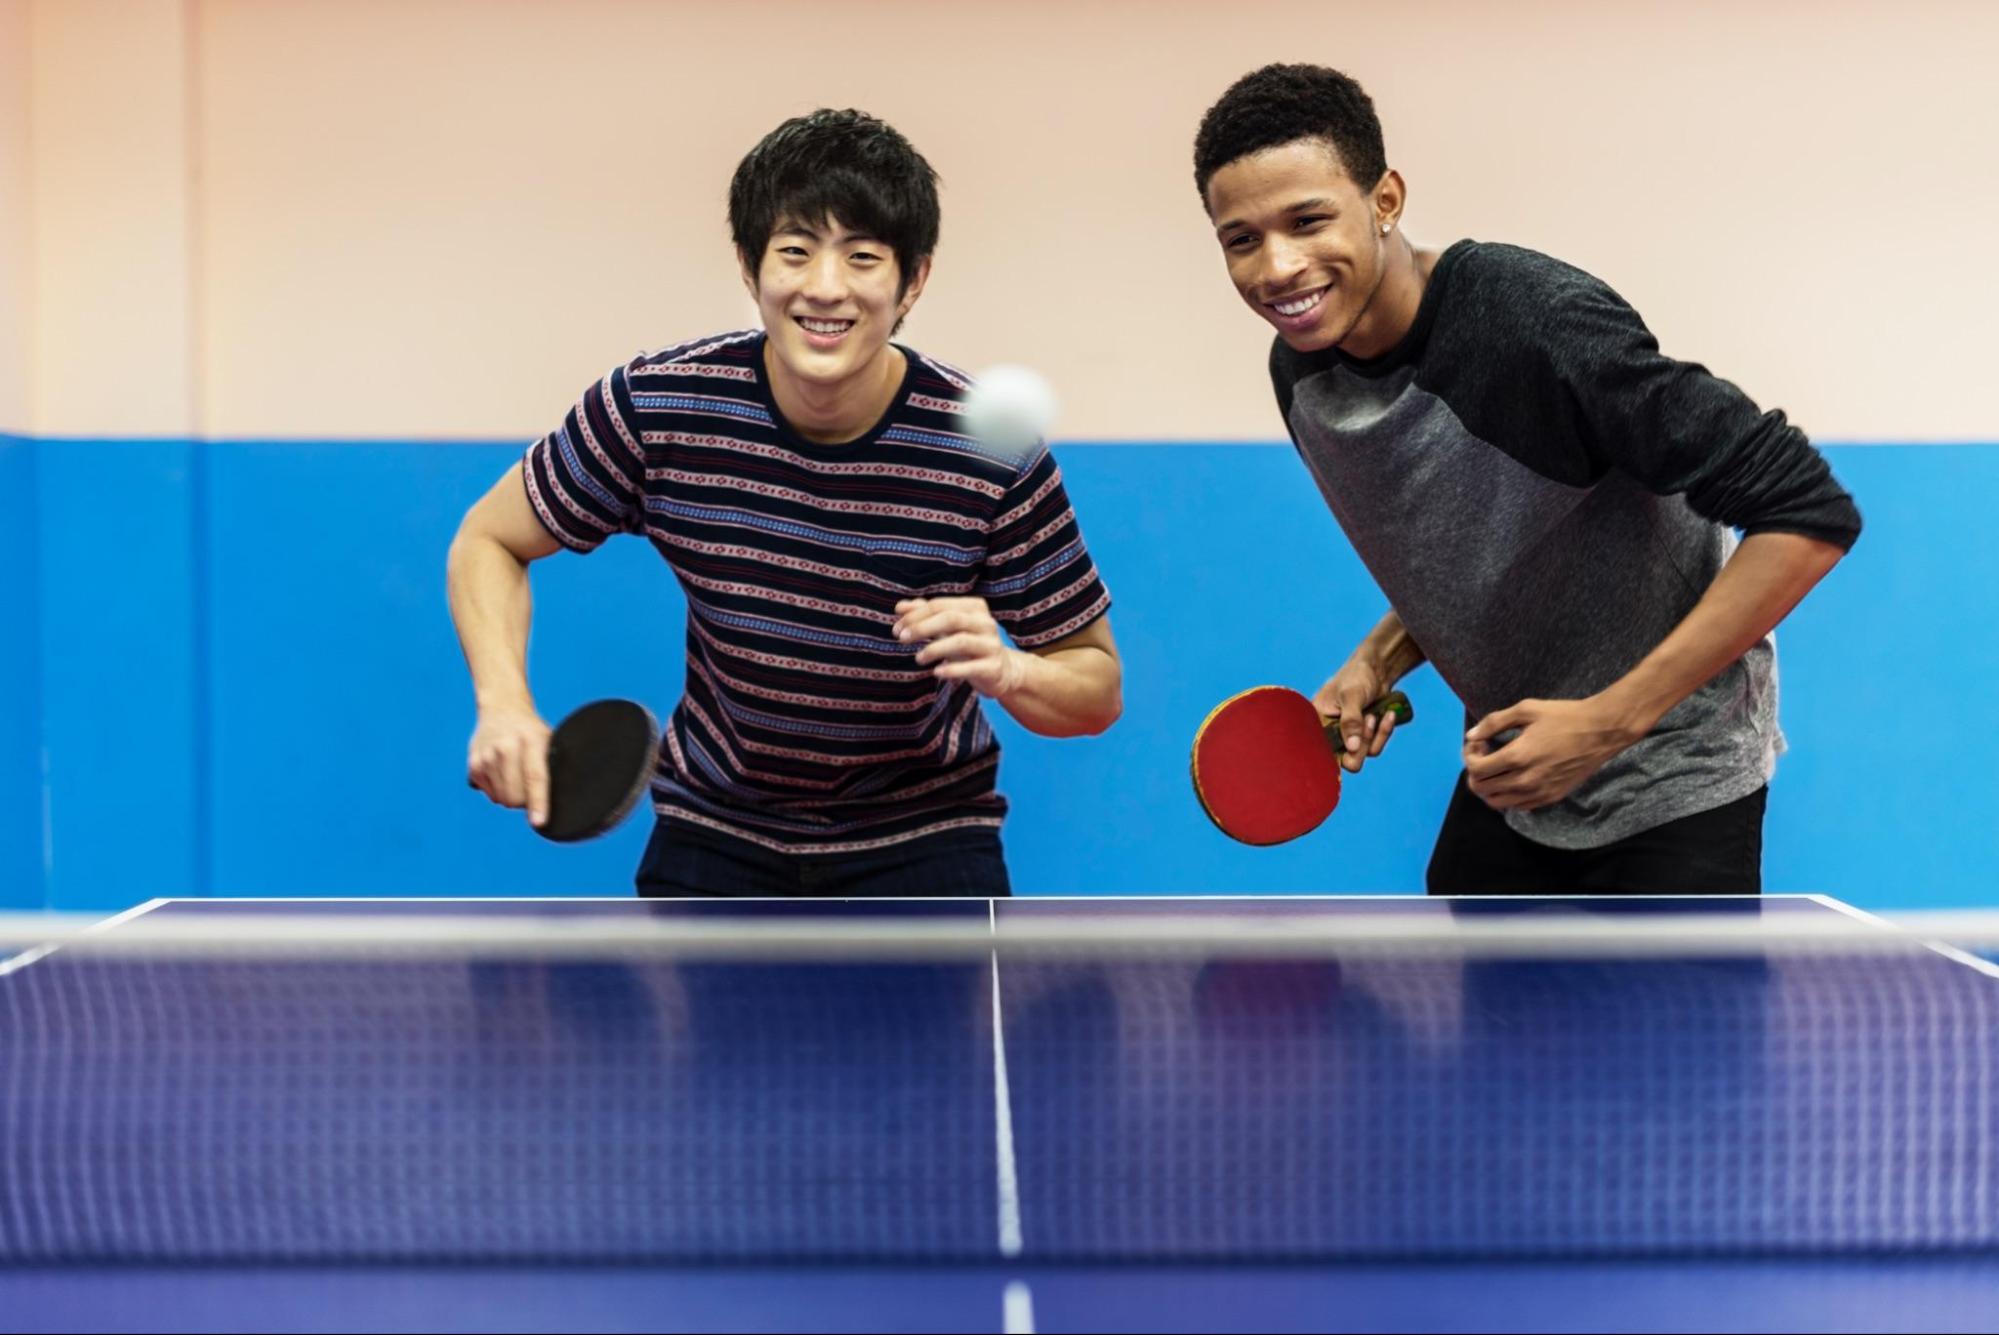 10-captivating-facts-about-table-tennis